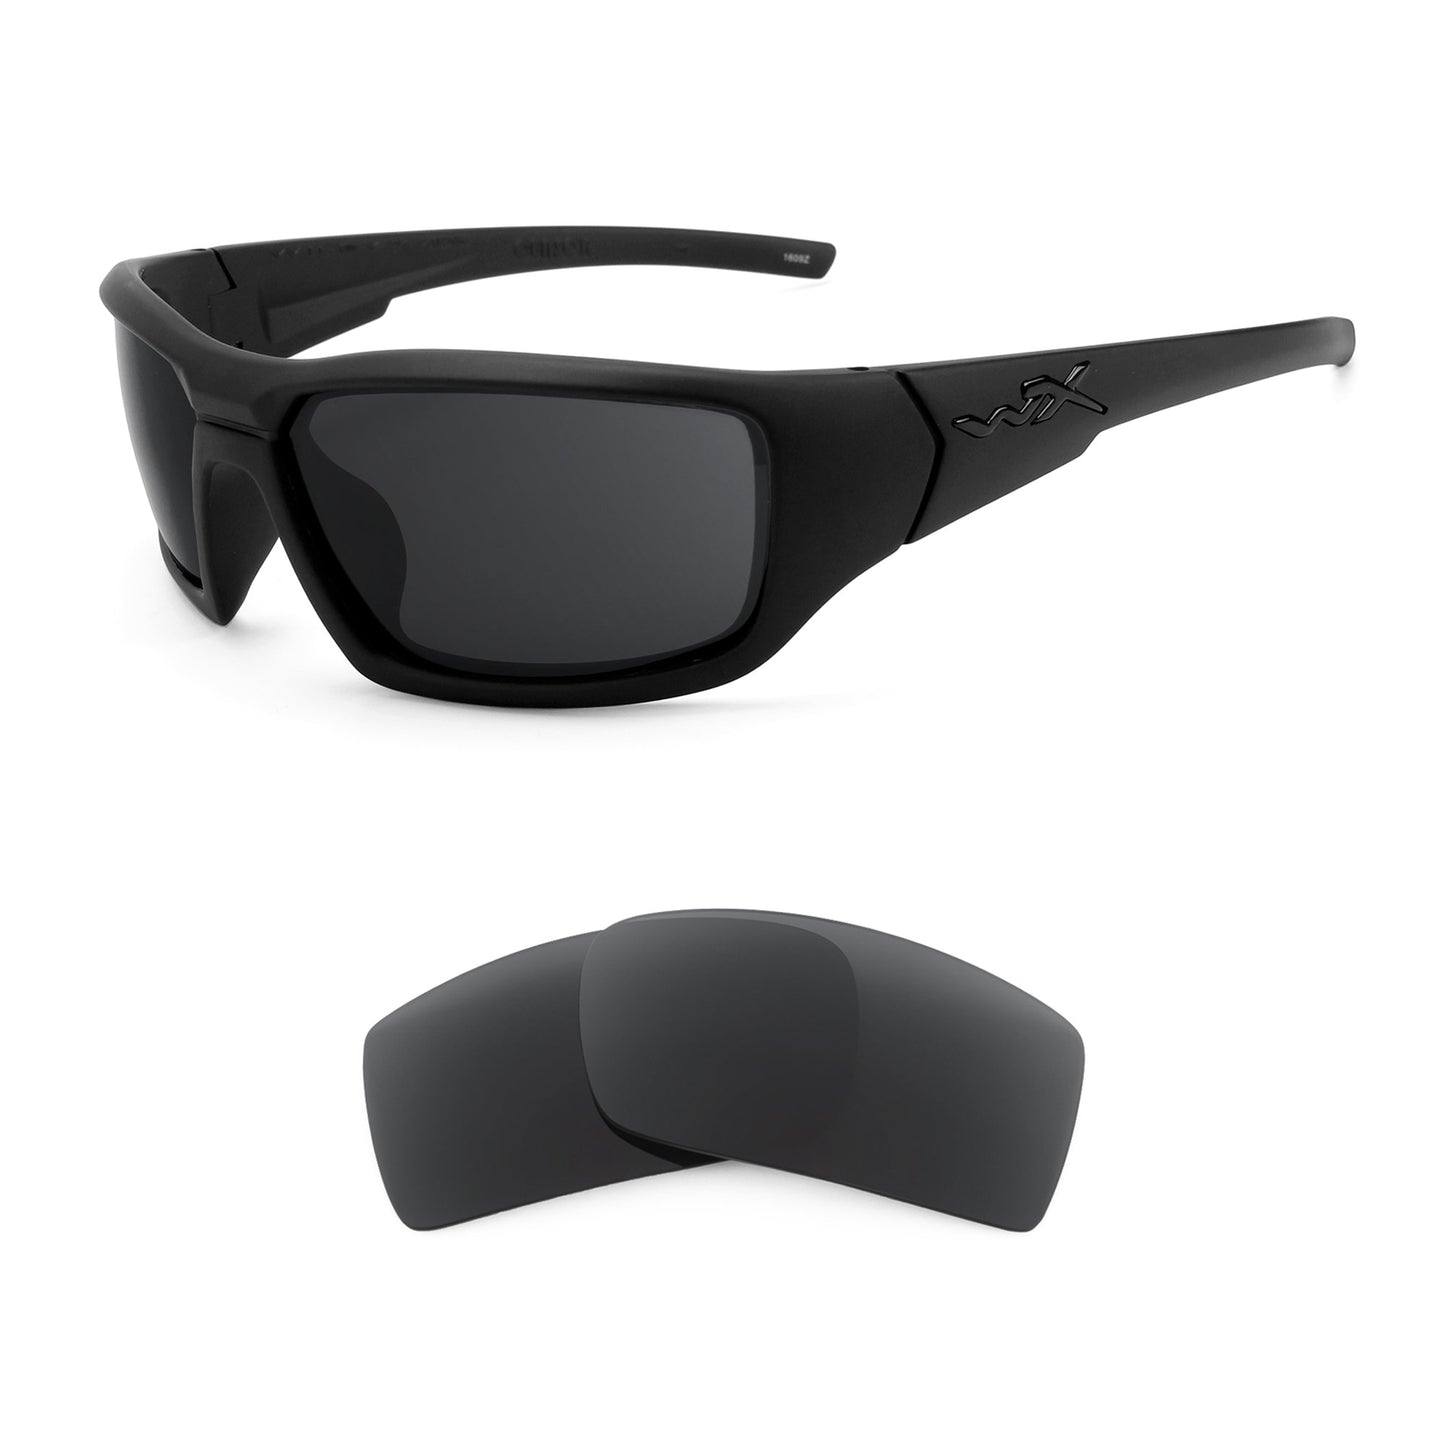 Wiley X Censor sunglasses with replacement lenses